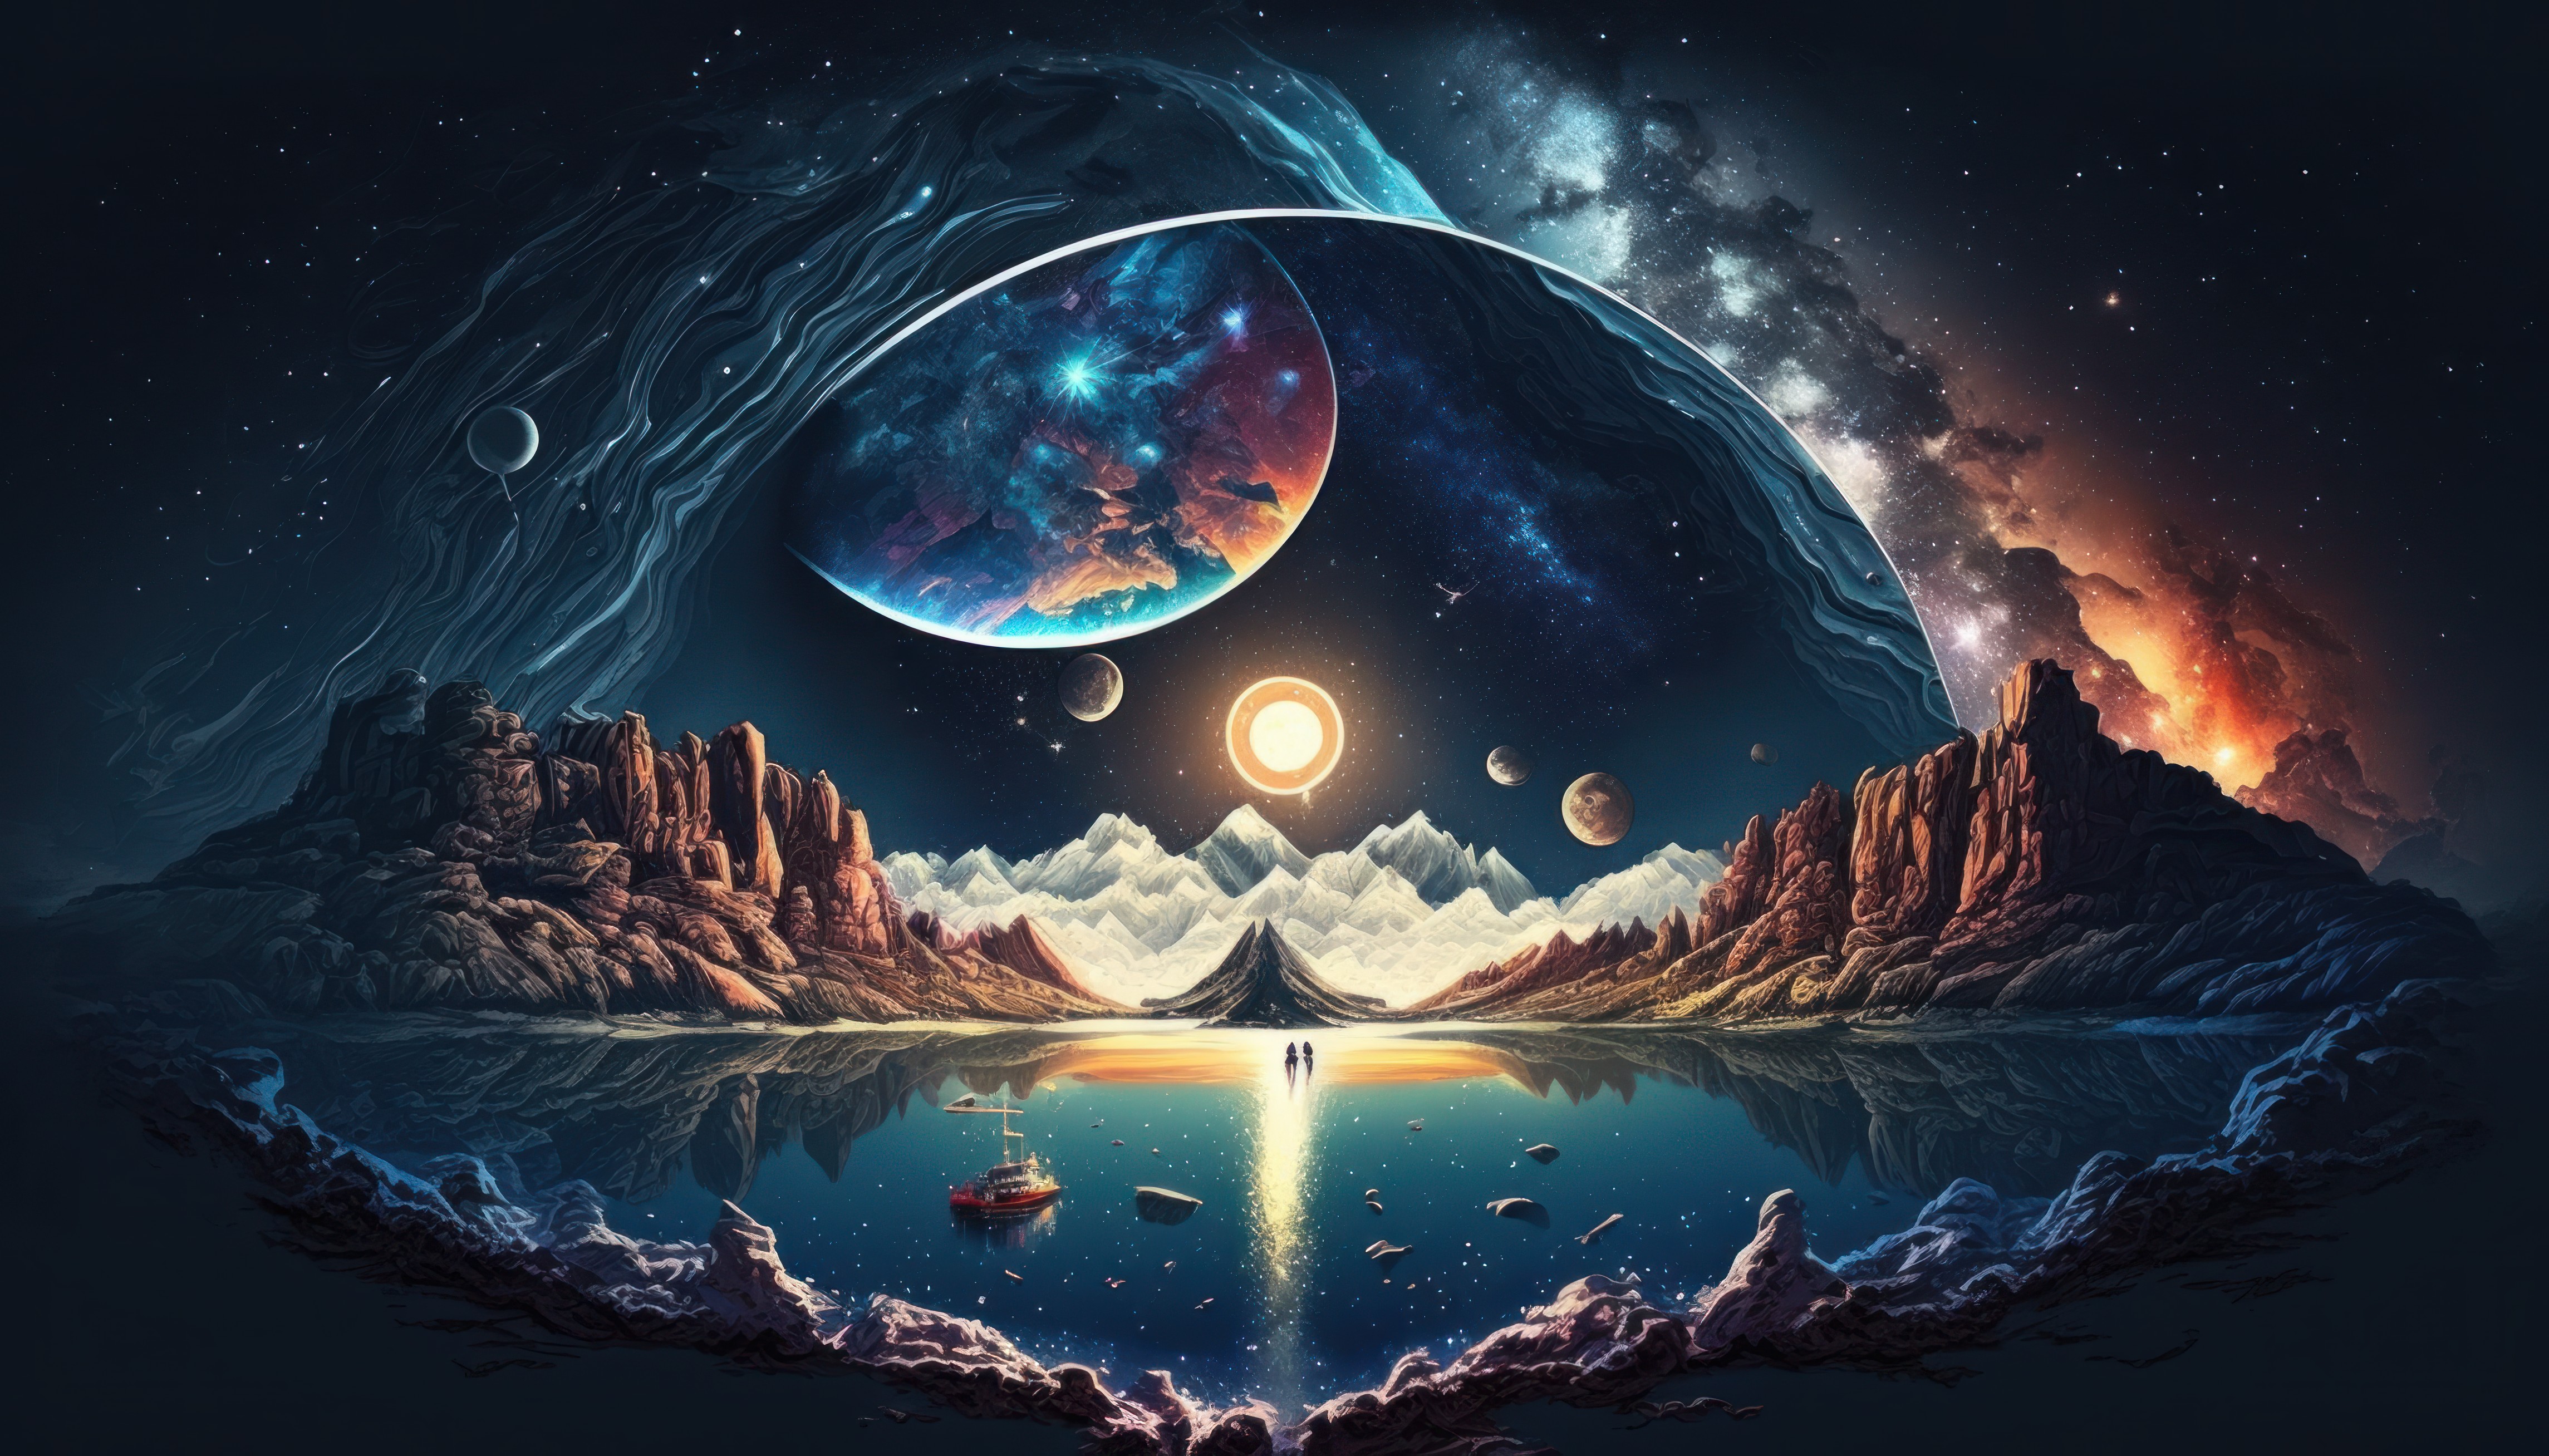 Ai Art Illustration Planet Space Water Reflection Boat Stars 4579x2616